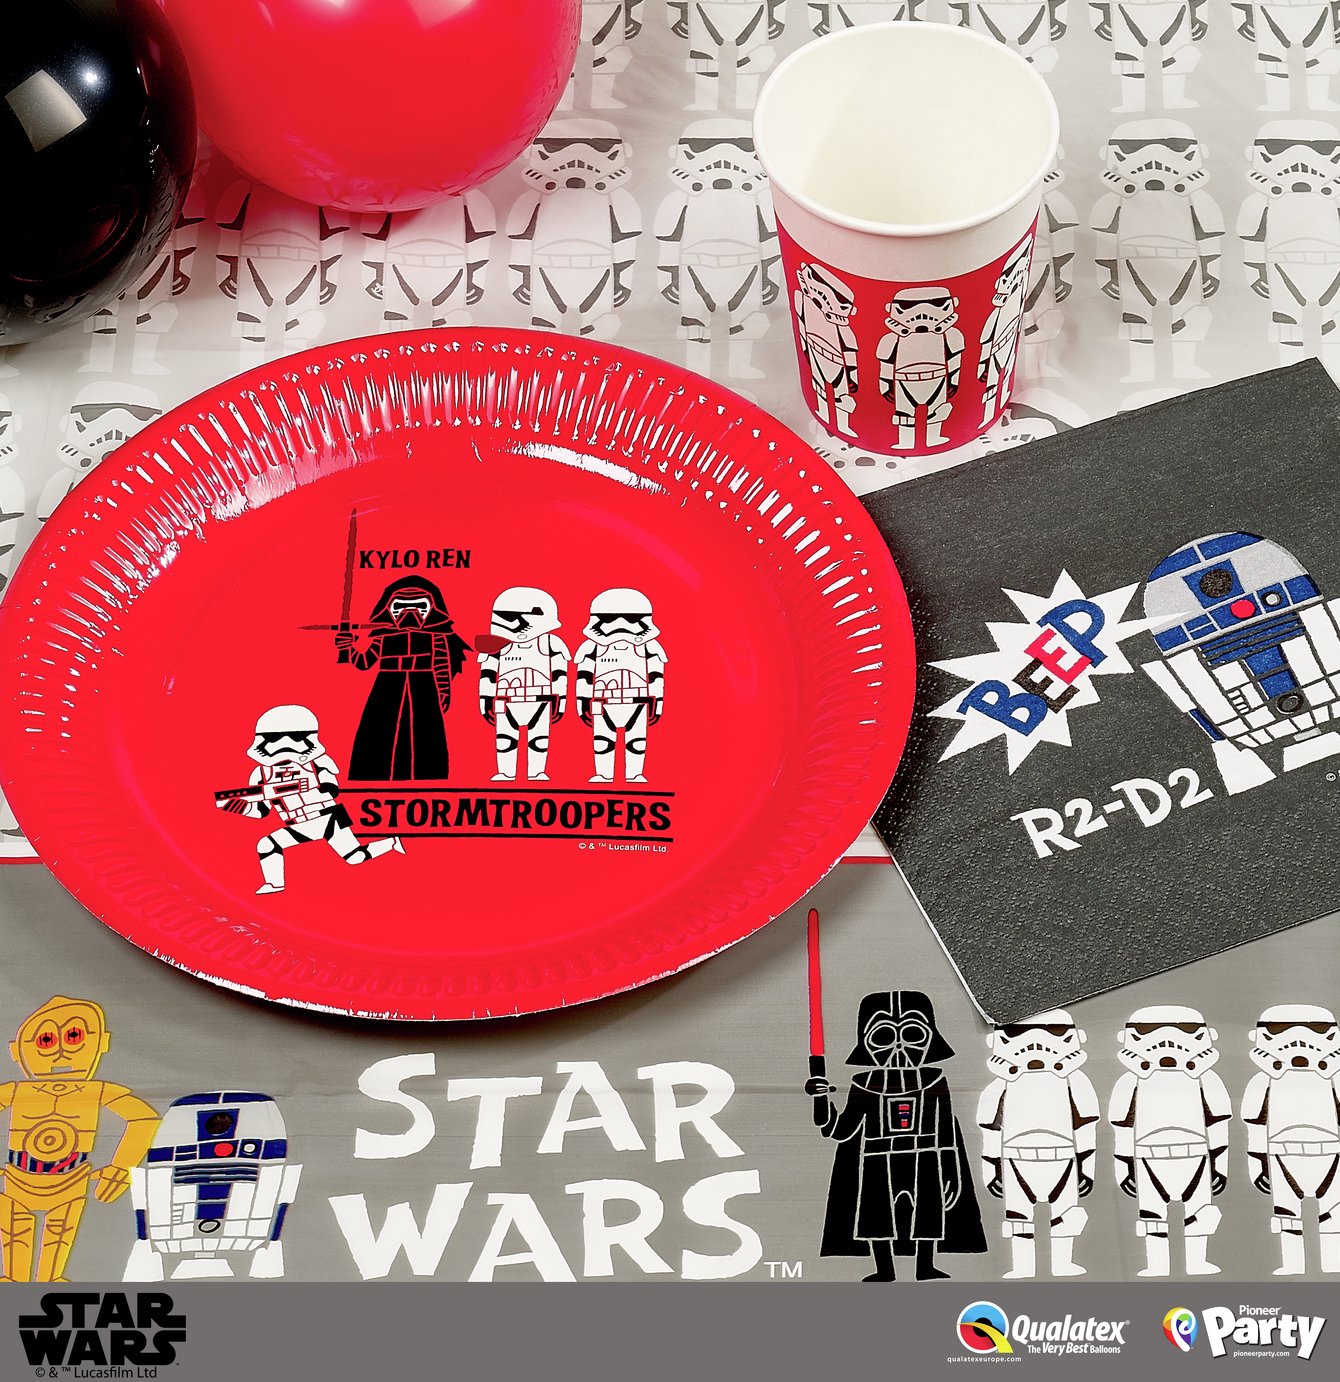 Disney Star Wars Premium Party Pack for 16 Guests review